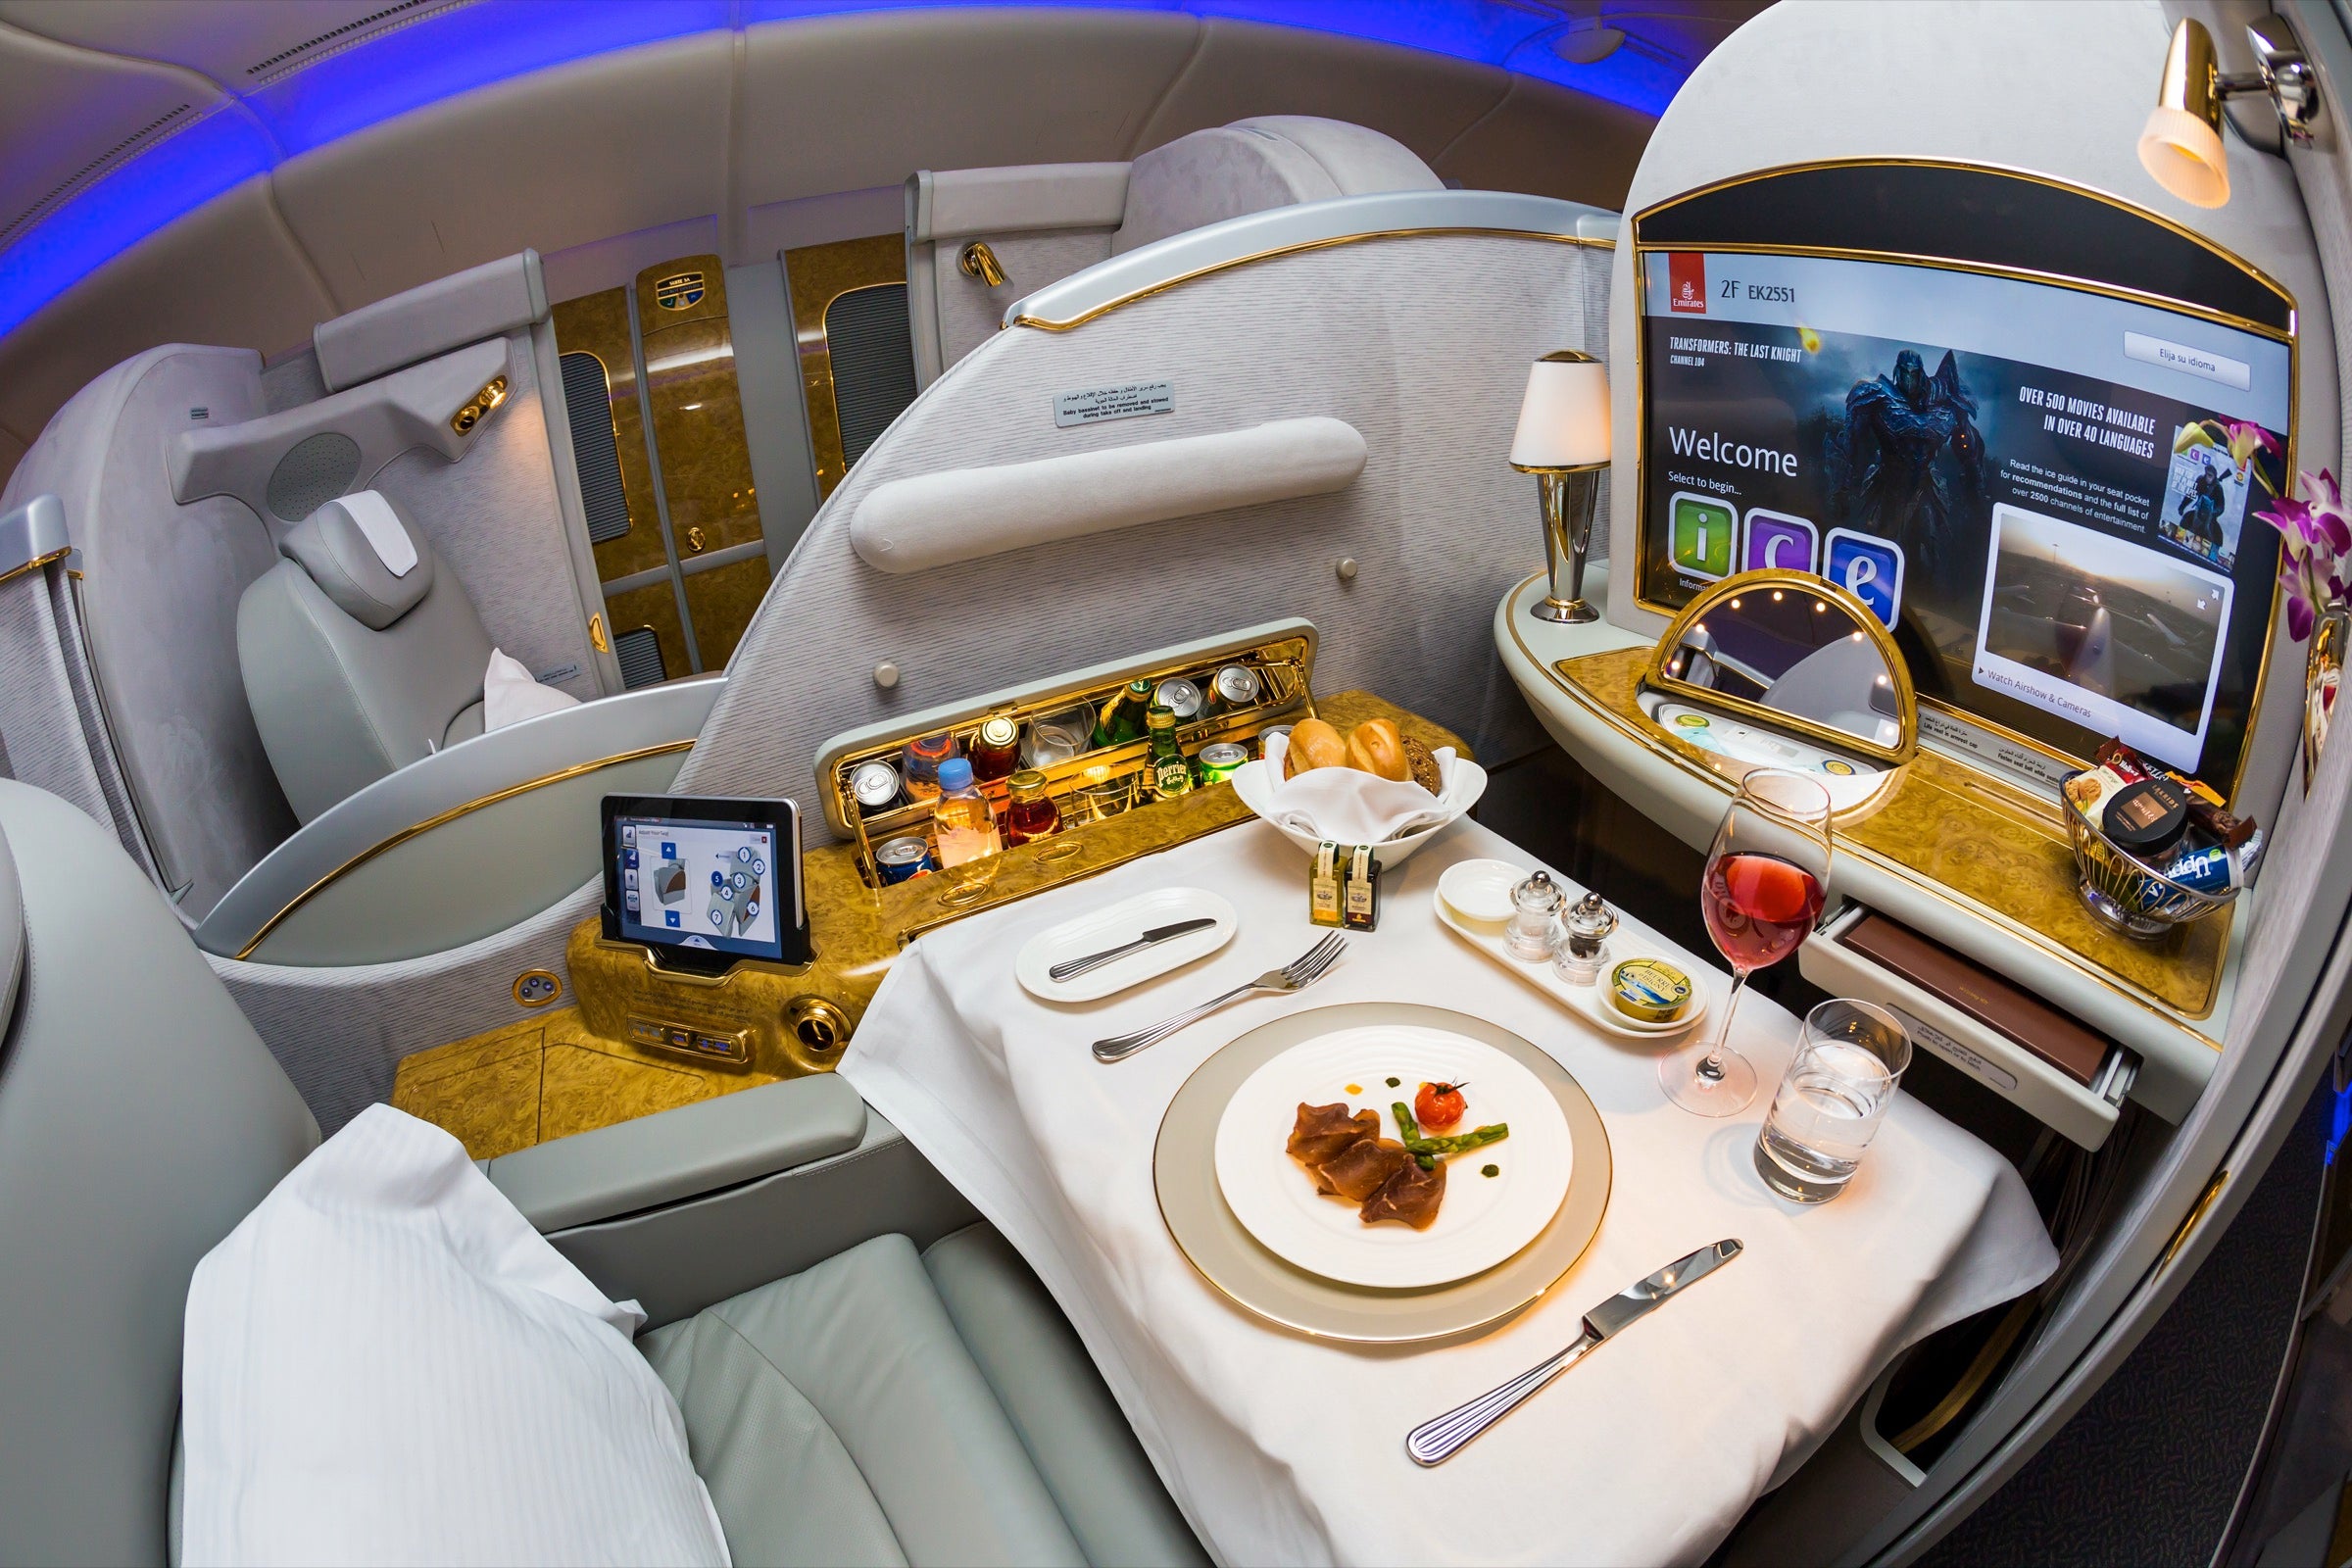 Emirates first class on A380